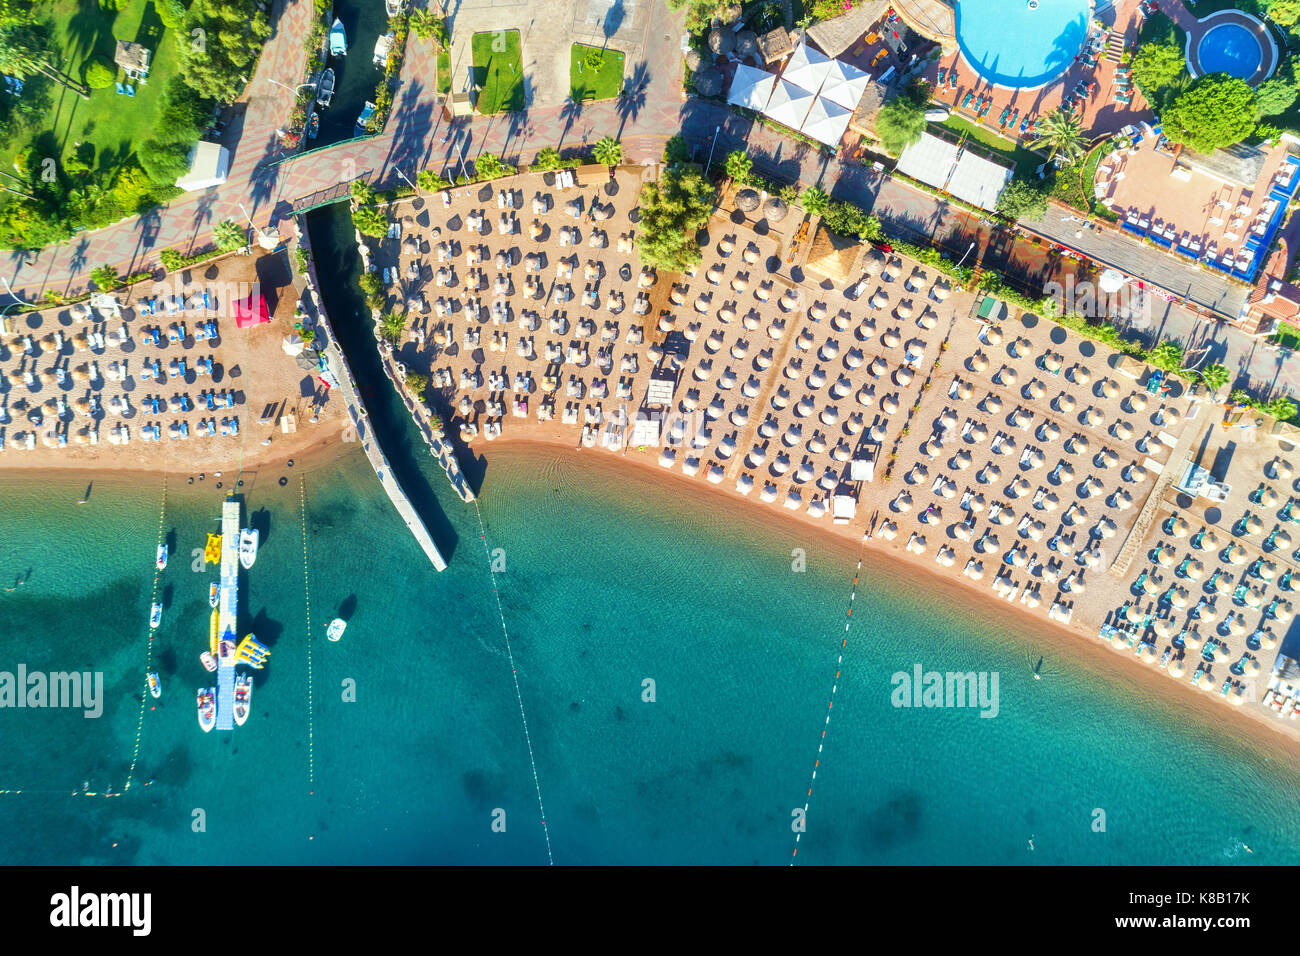 Aerial view of transparent turquoise sea, beautiful sandy beach with colorful chaise-lounges, boats, green trees, pool, hotels, buildings at sunrise i Stock Photo